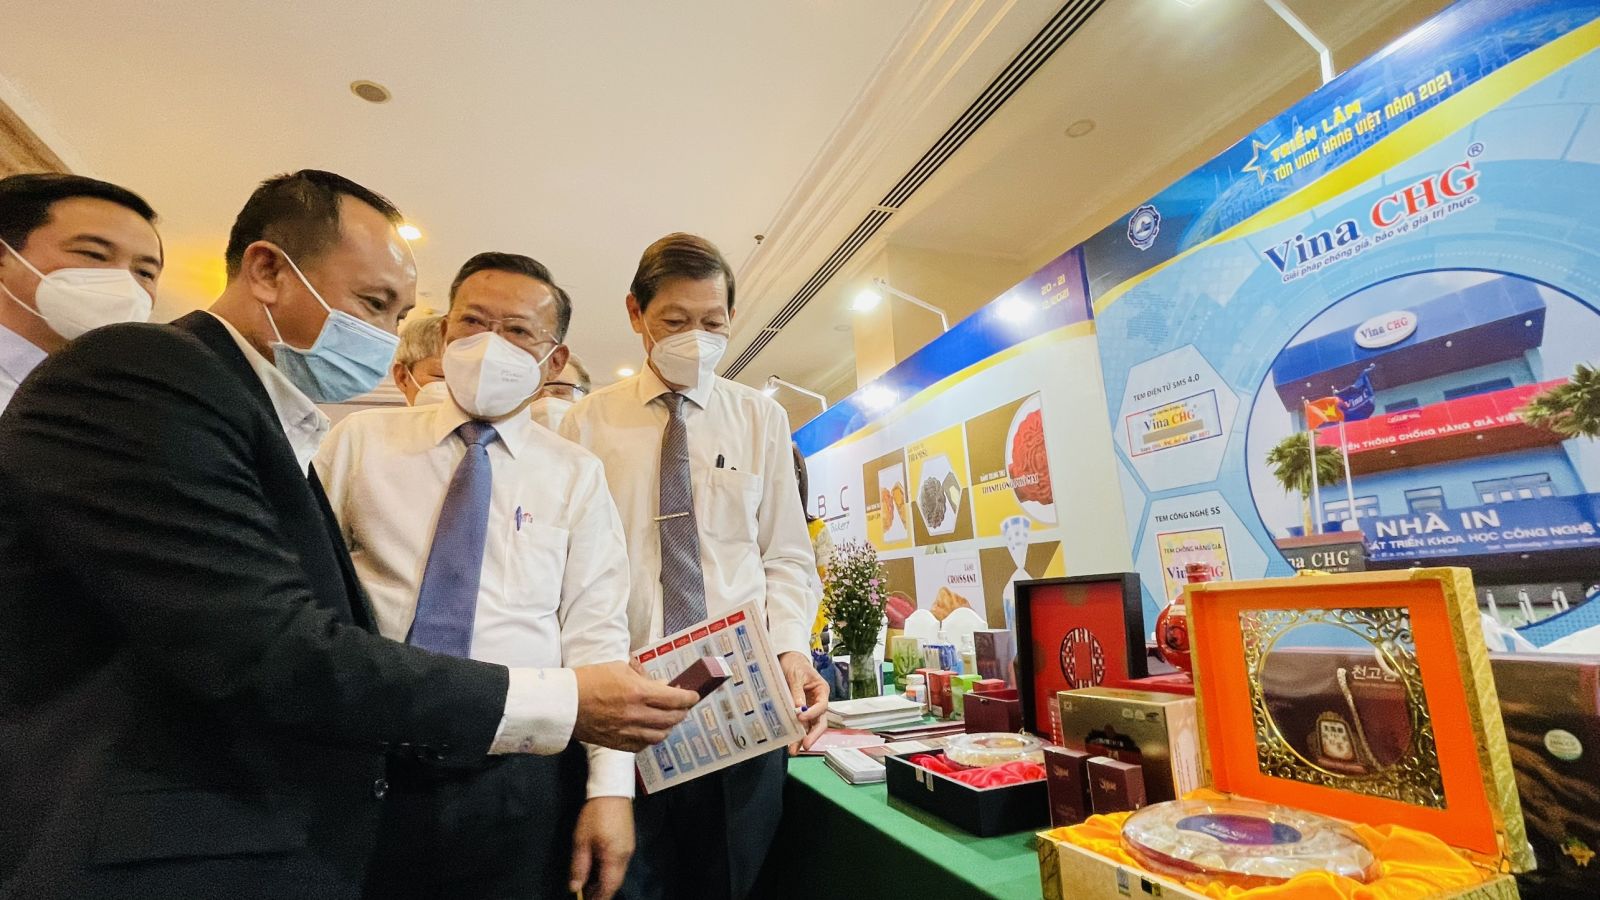 Vina CHG General Director Nguyen Viet Hong introduces products in Vina CHG and Phu Hong Thanh's booths.